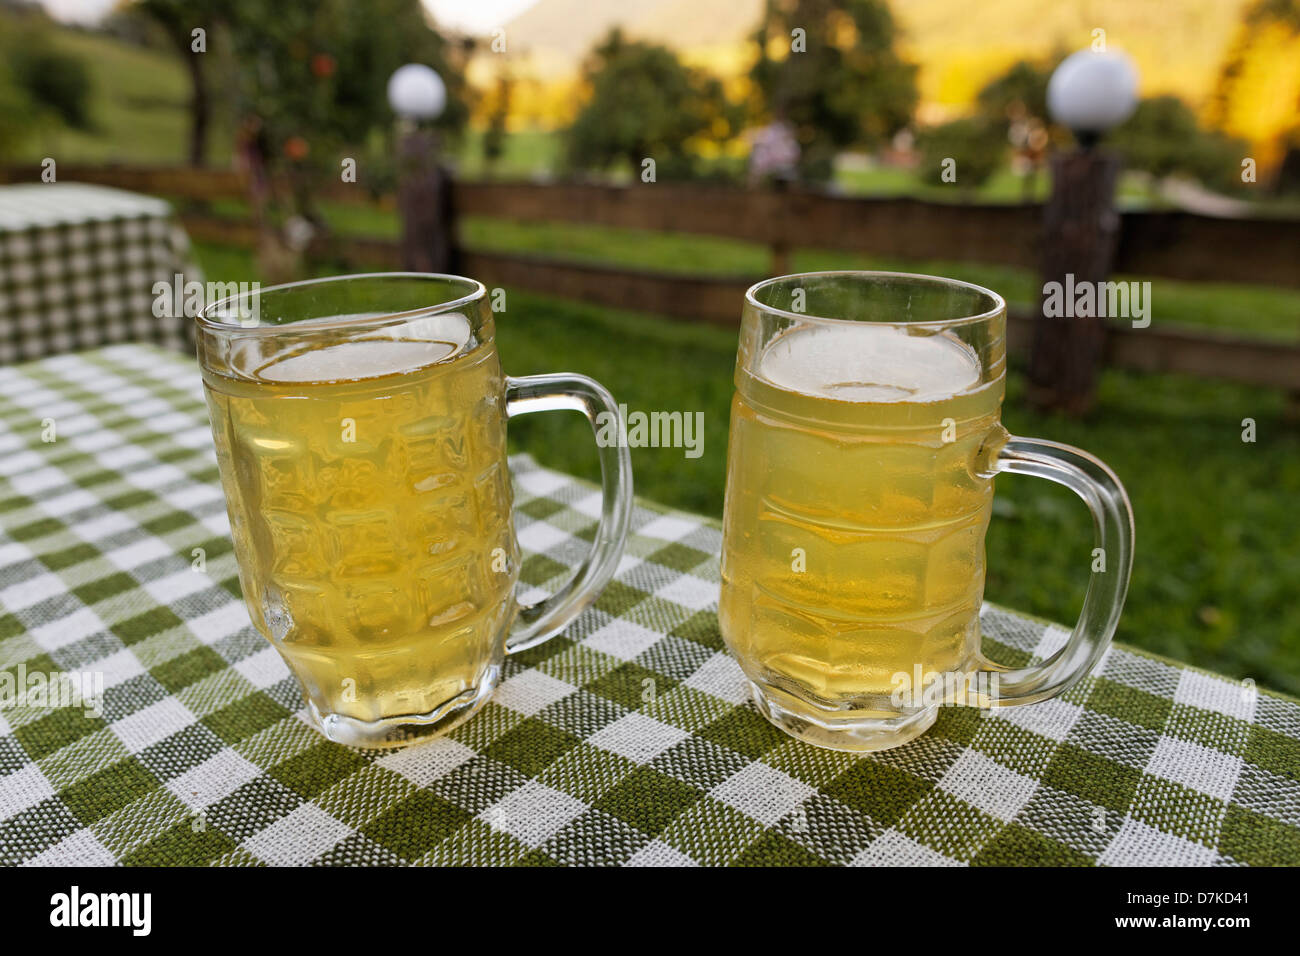 Austria, Upper Austria, Two glasses of cider on table Stock Photo